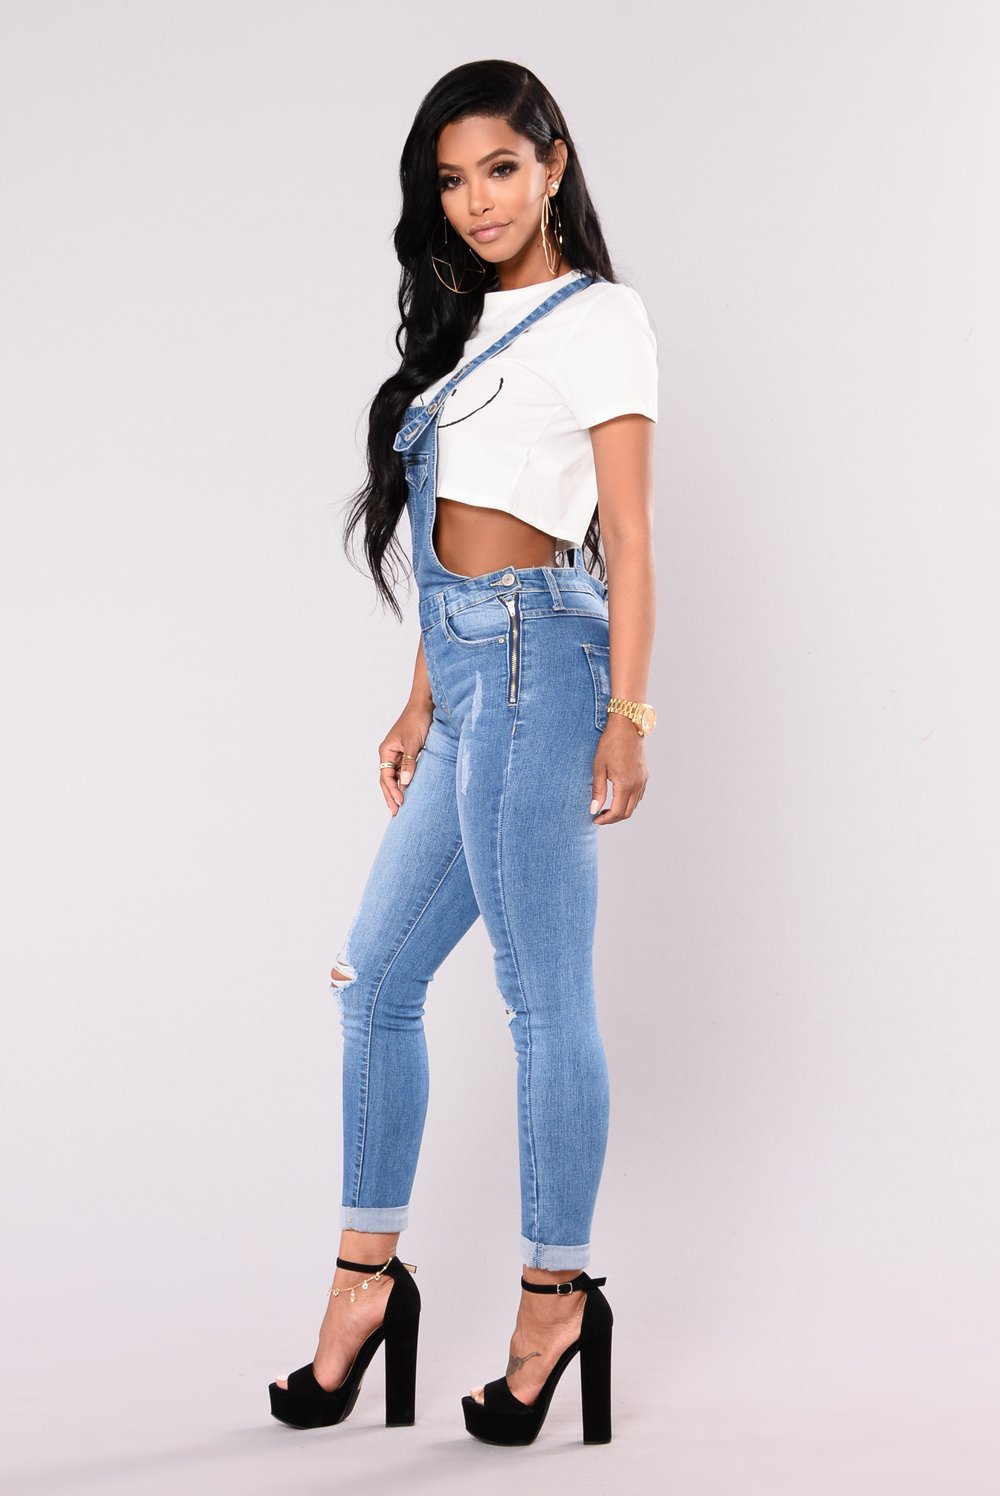 Slim Fit Ripped Lifting Strap Jeans